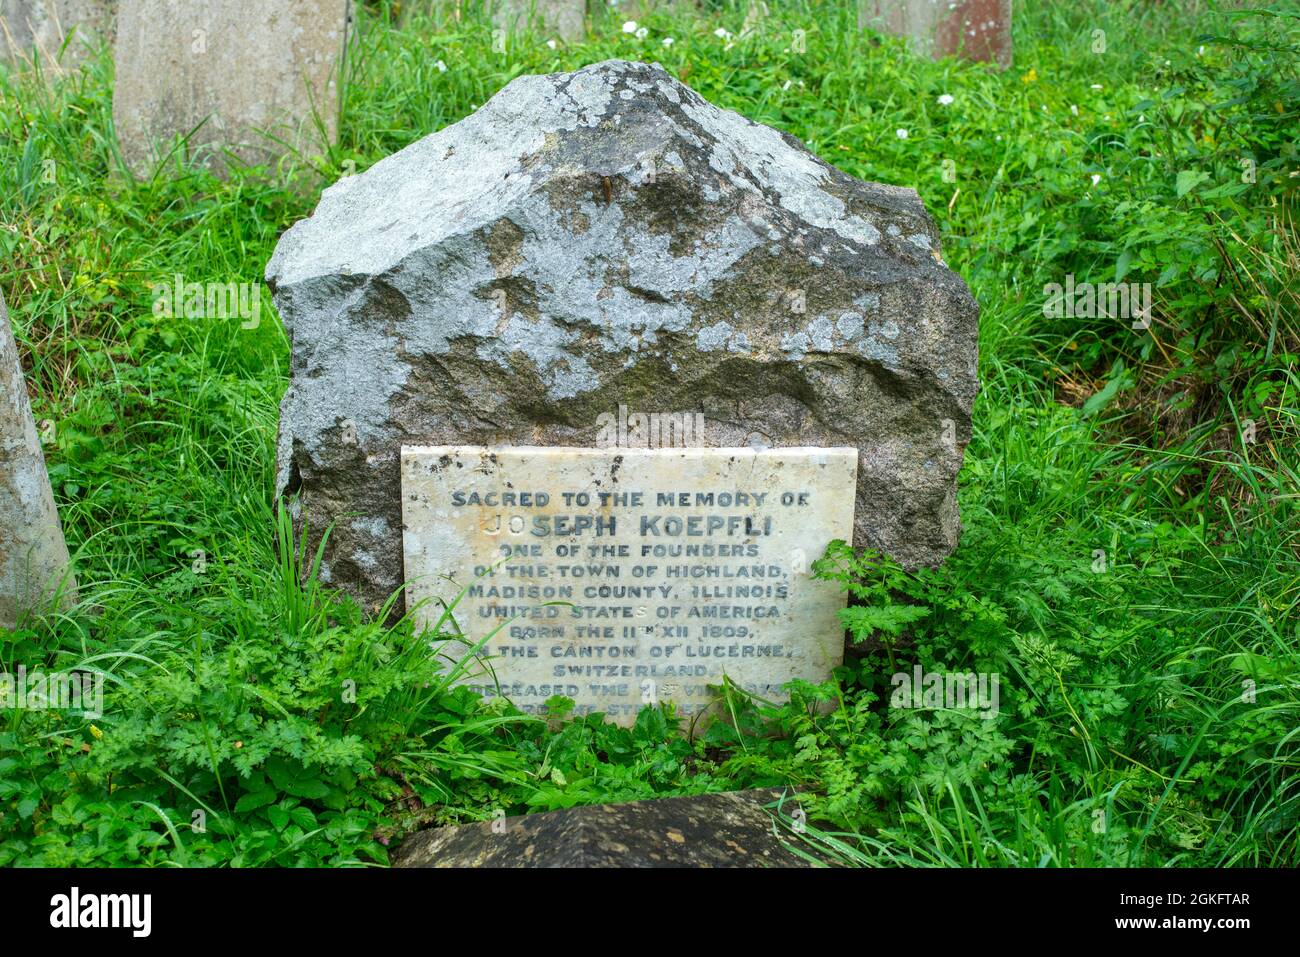 Memorial stone to Joseph Koepfli, one of the founders of Highland, Madison County, Illinois, USA in Southampton Old Cemetery, Hampshire England. Stock Photo